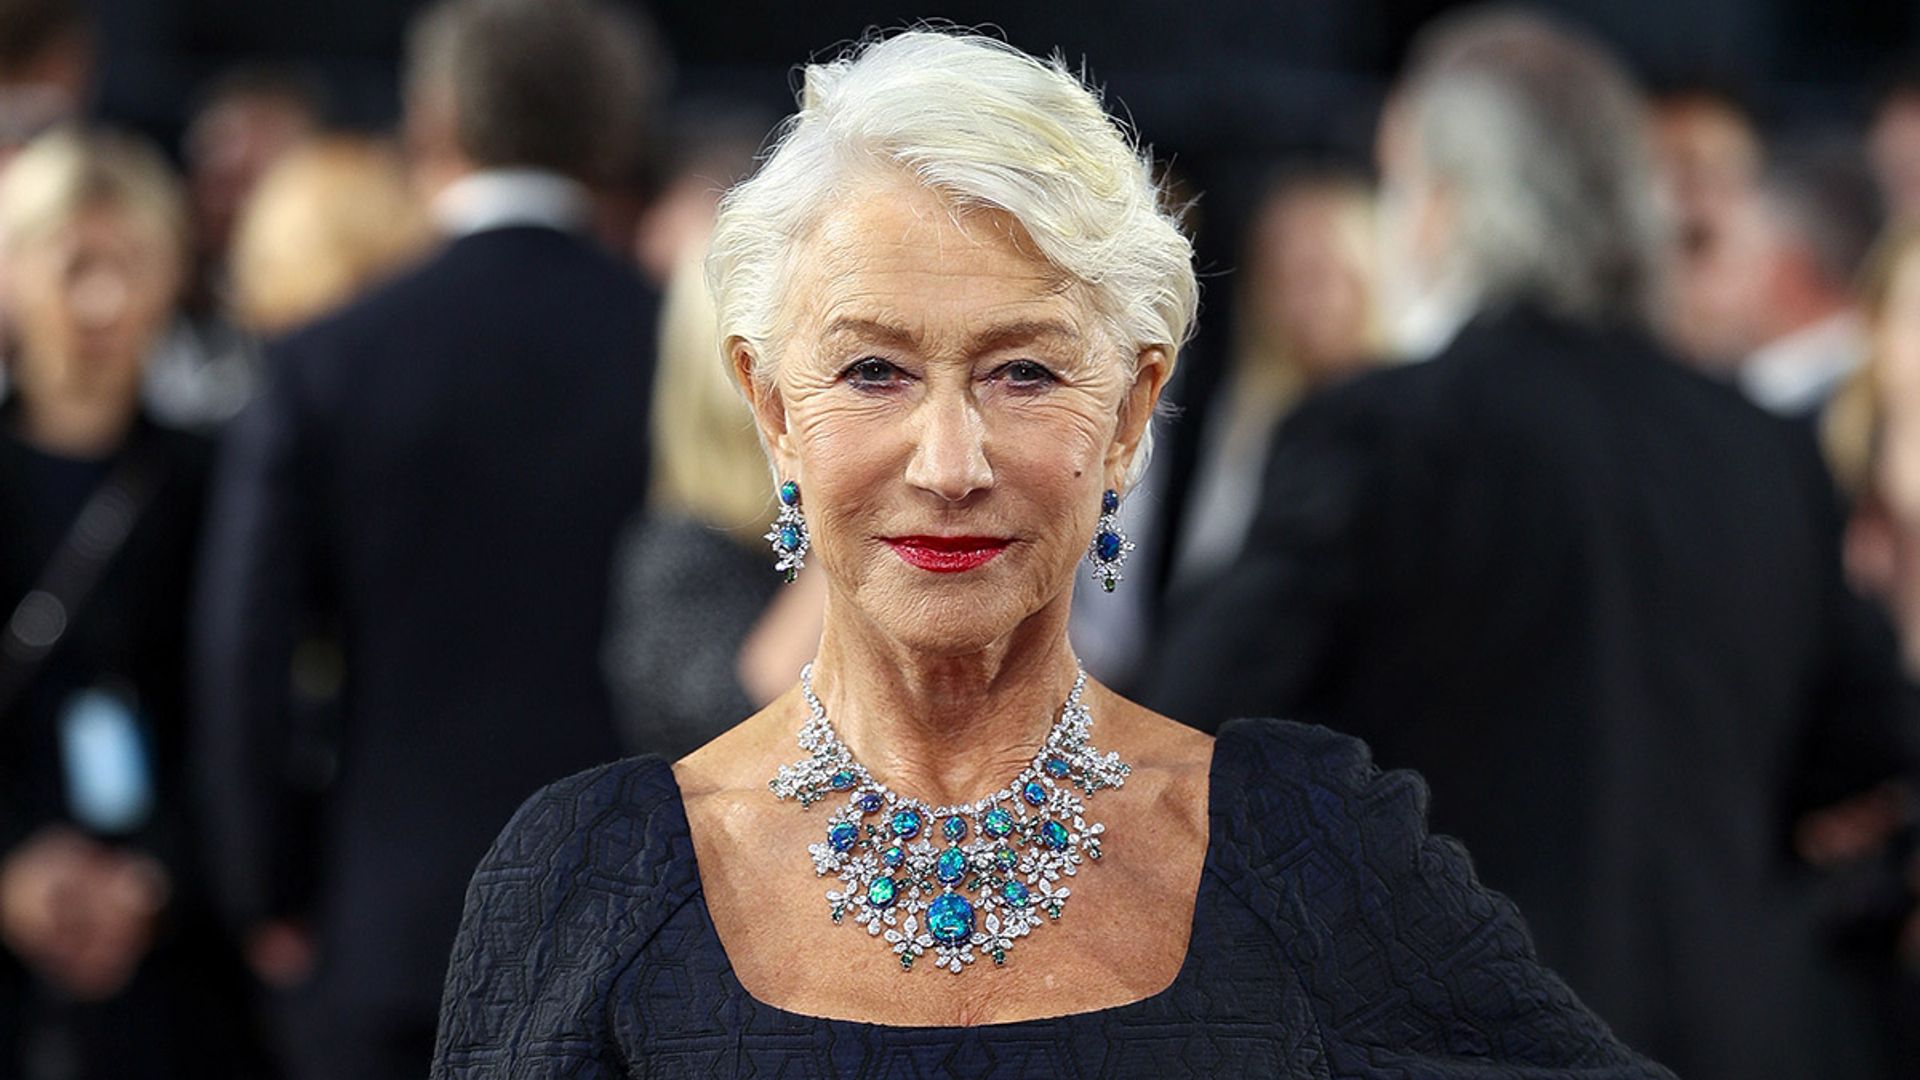 Helen Mirren discovers female empowerment in her latest role as Catherine the Great